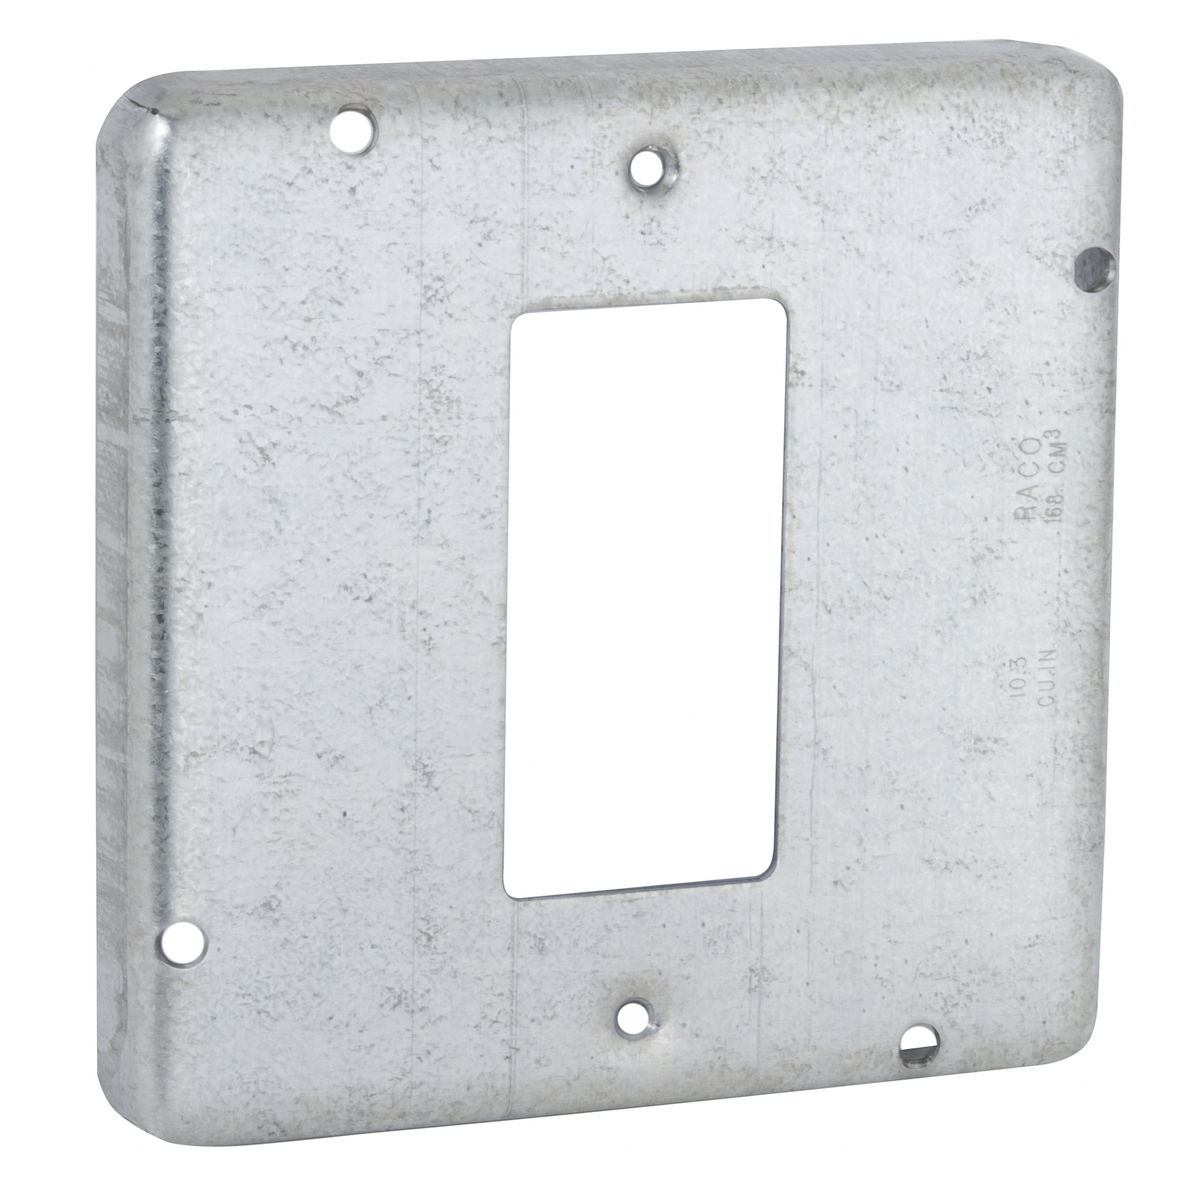 RACO 856 4-11/16" SQUARE EXPOSED WORK COVER, 1 GFCI